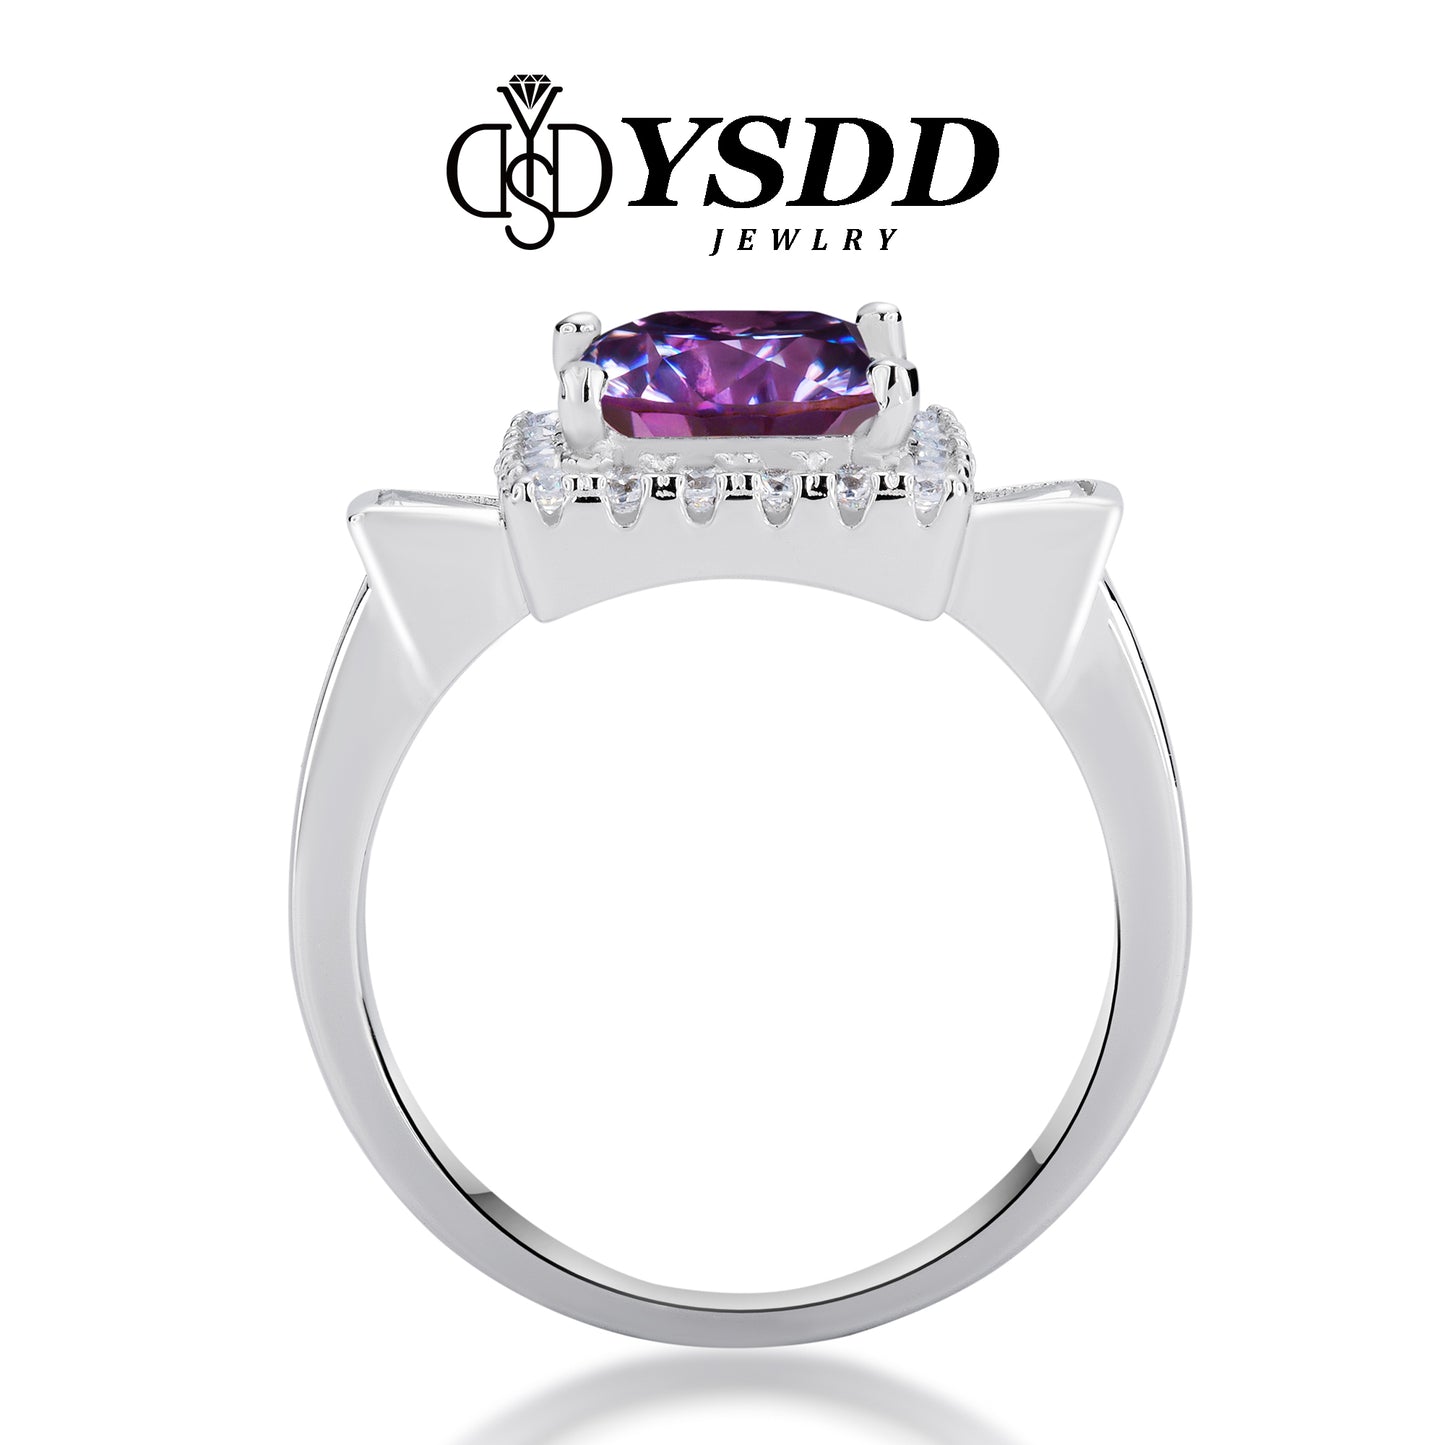 【#608】2CT Galaxy Purple Halo Princess Cut Moissanite Ring in 925 Sterling Silver